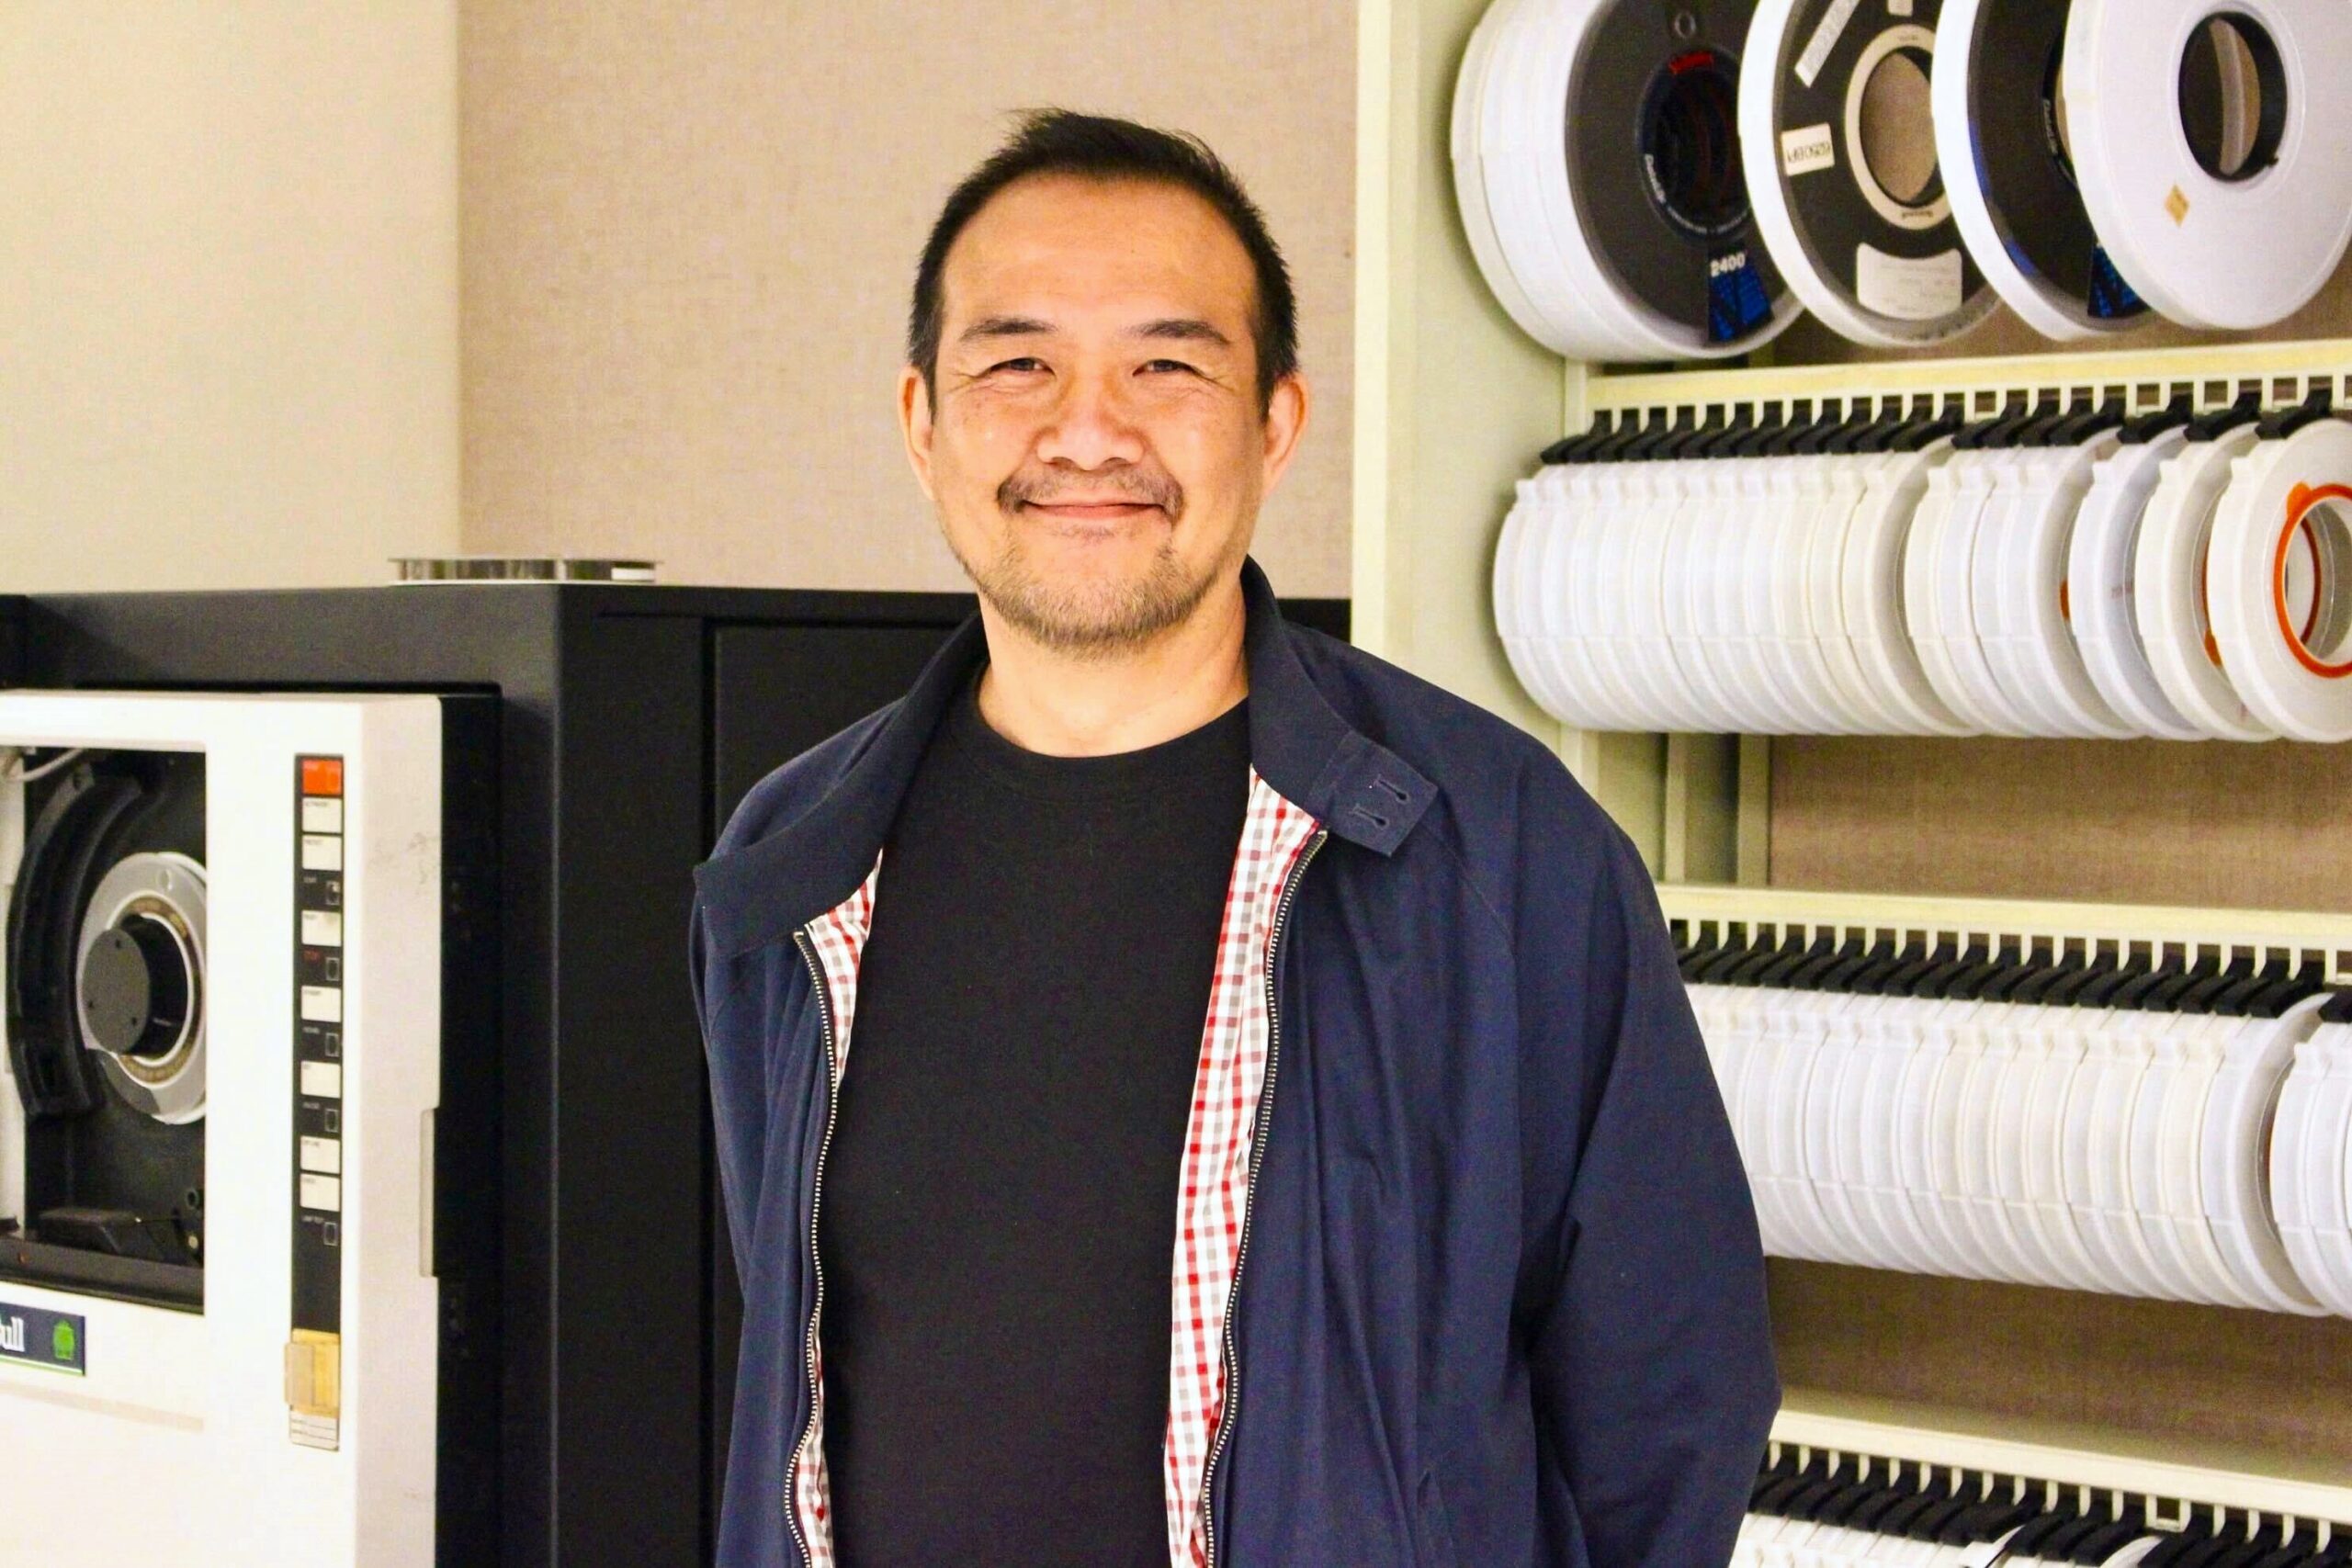 Diefenbunker 2024 Artist-in-Residence Don Kwan stands in front of historic computer equipment in the Diefenbunker.